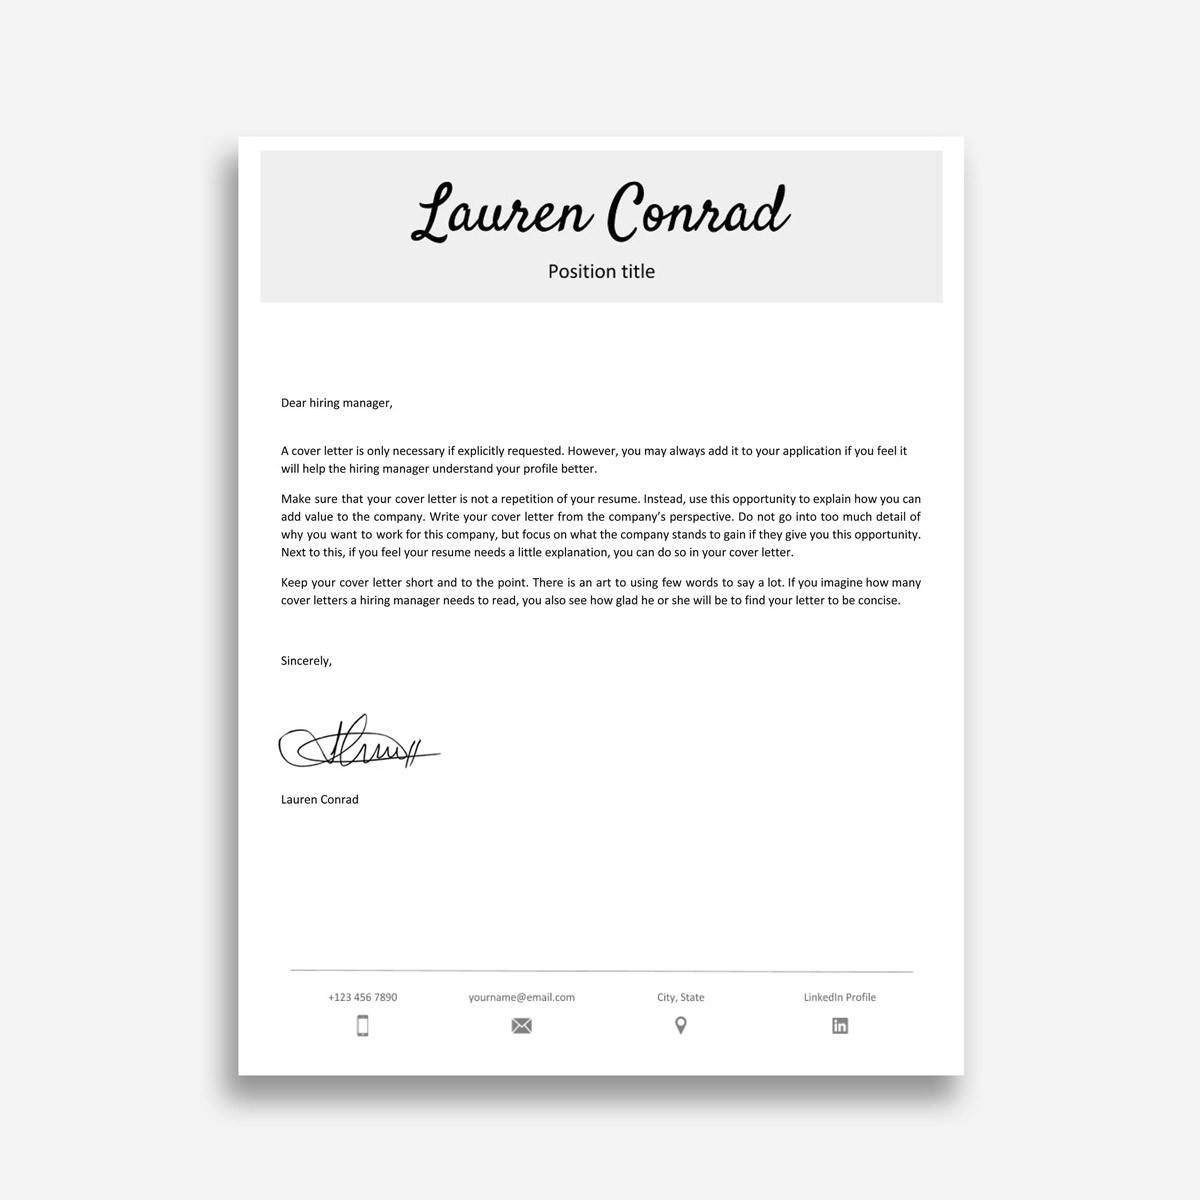 Letter Template Google Docs from cdn-images.zety.com